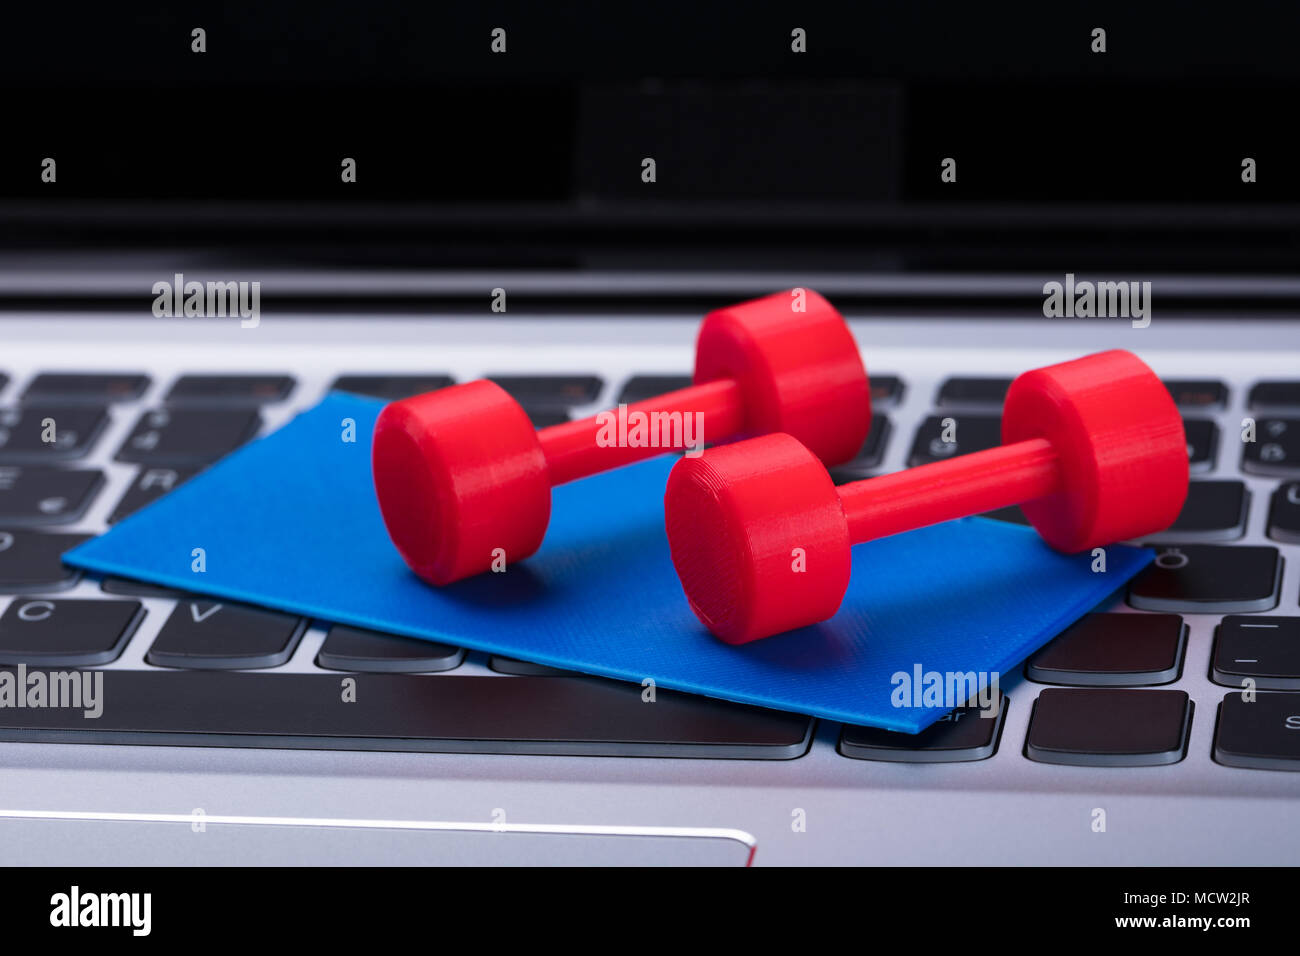 Elevated View Of Dumbbells And Exercise Mat On Computer Keyboard Stock Photo